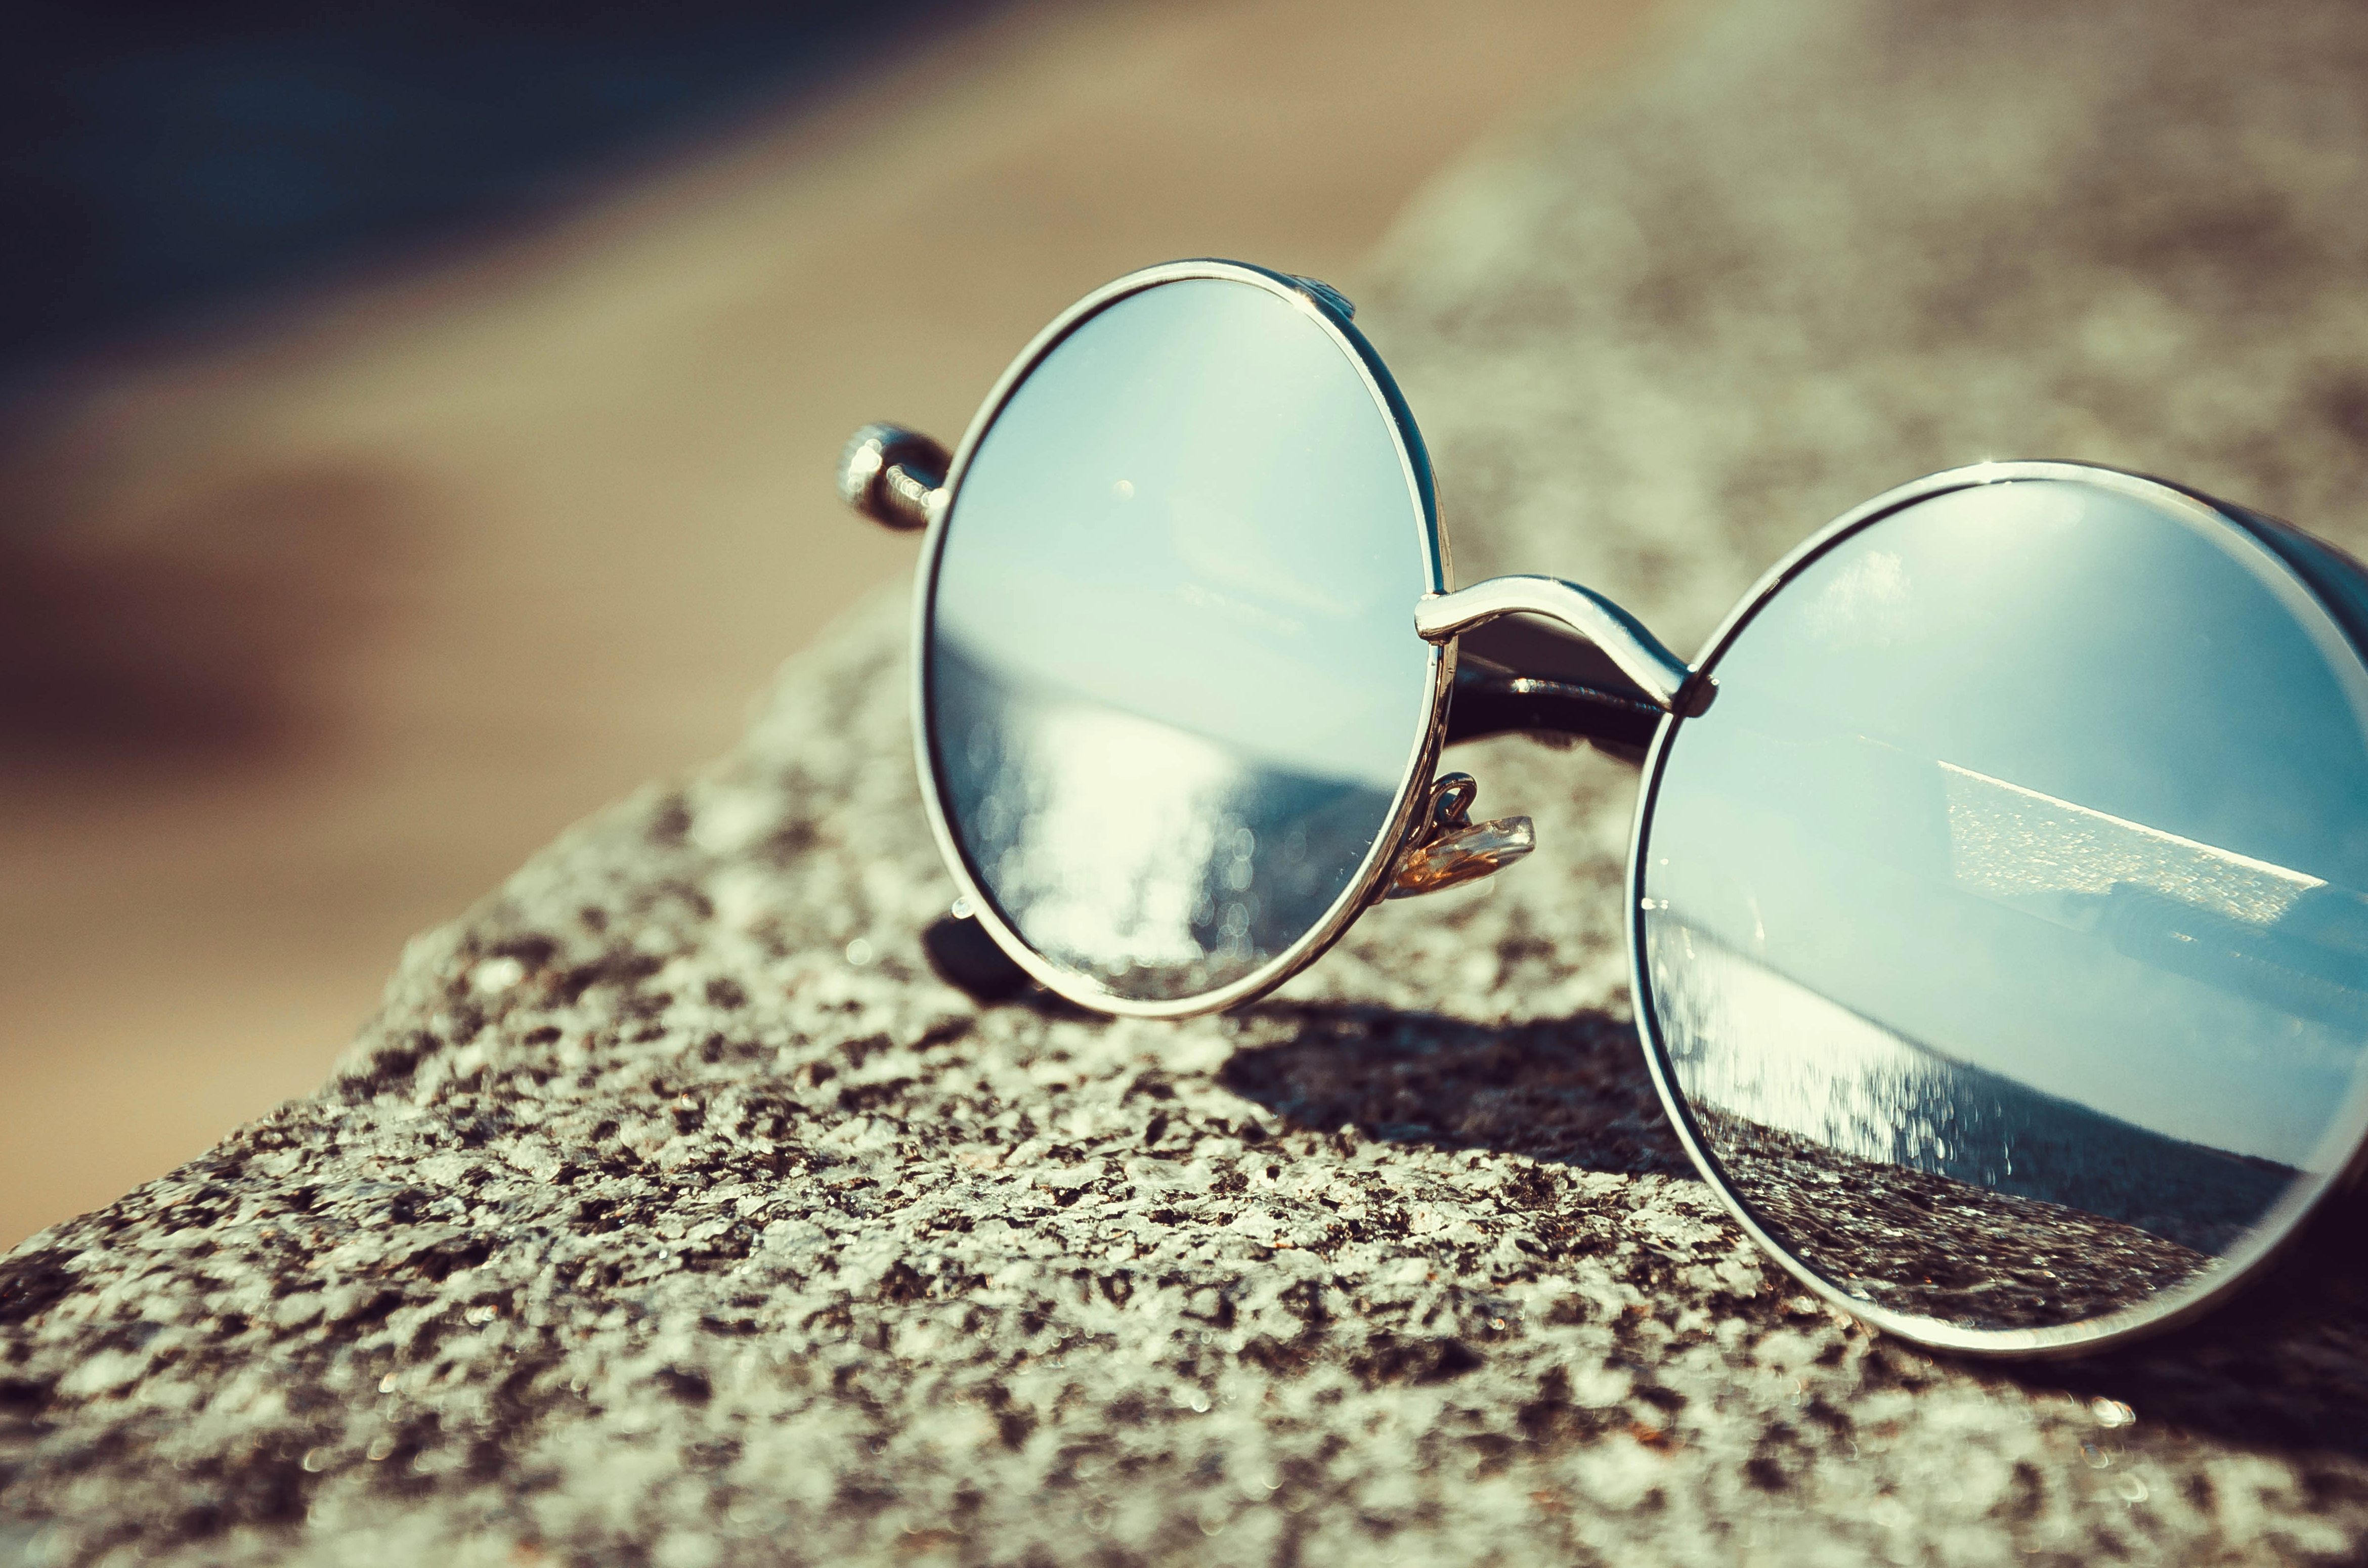 Free picture: sunglasses, mirror, reflection, object, summer